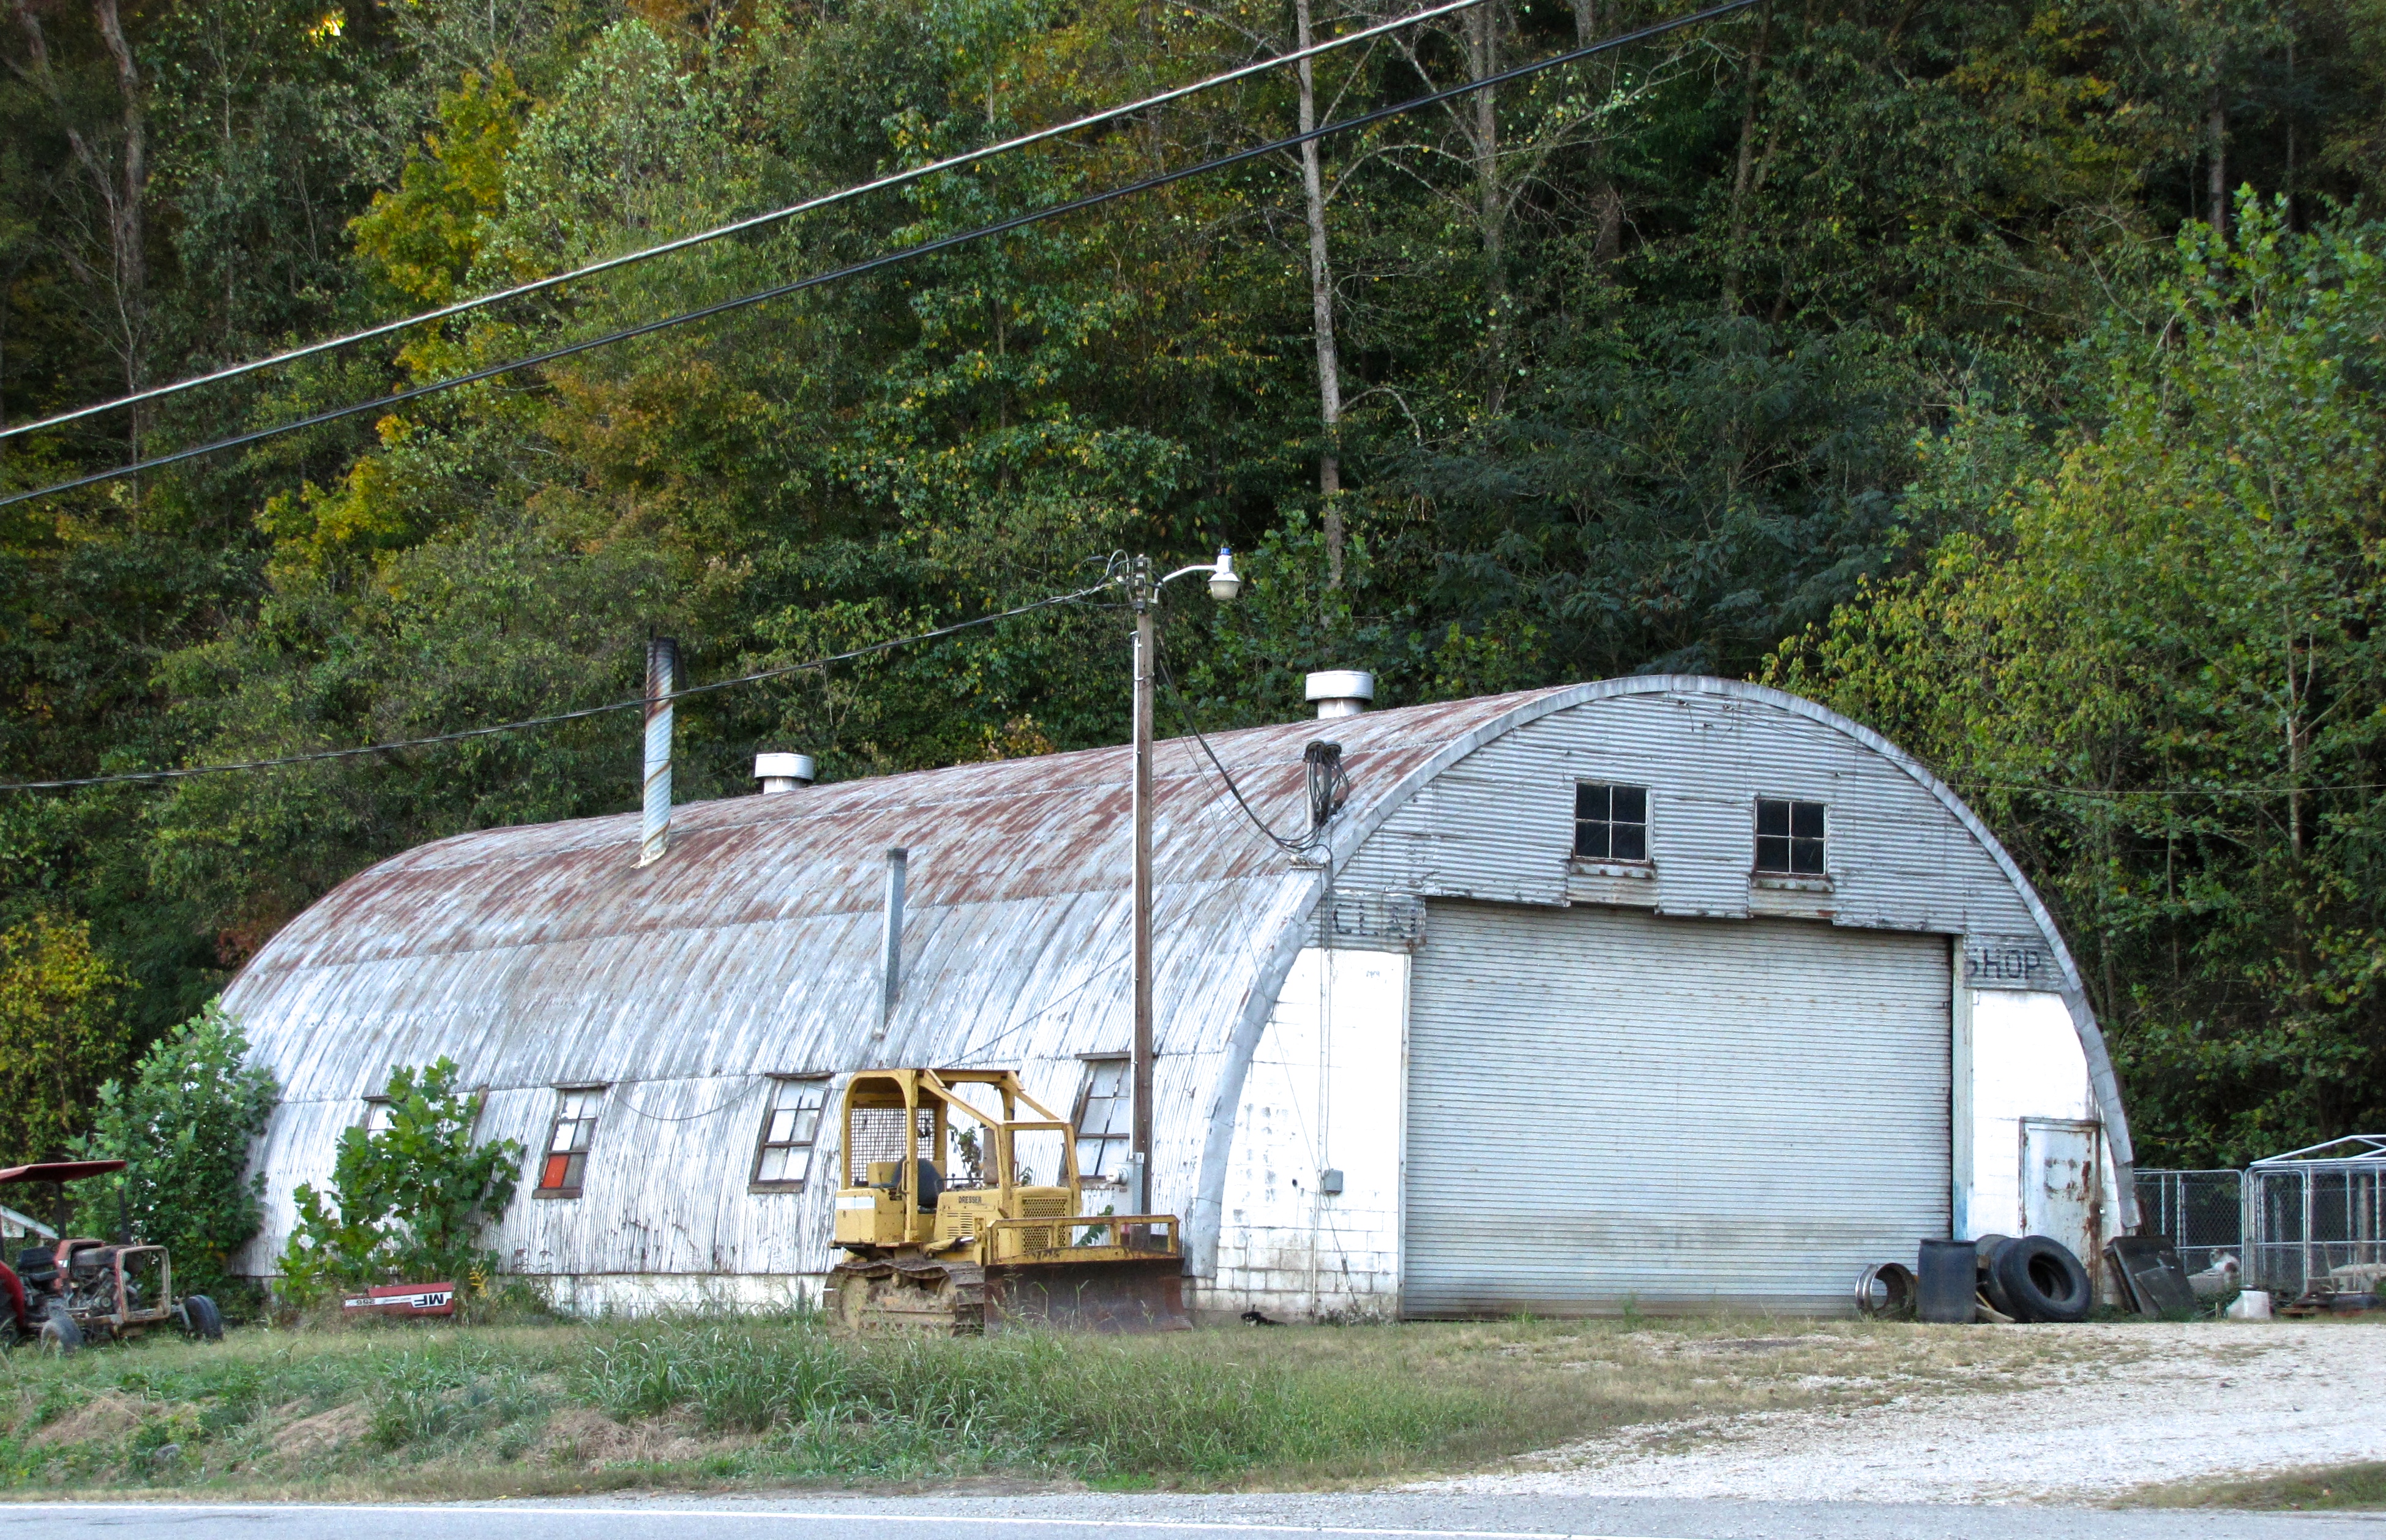 quonset hut in Latonia, KY